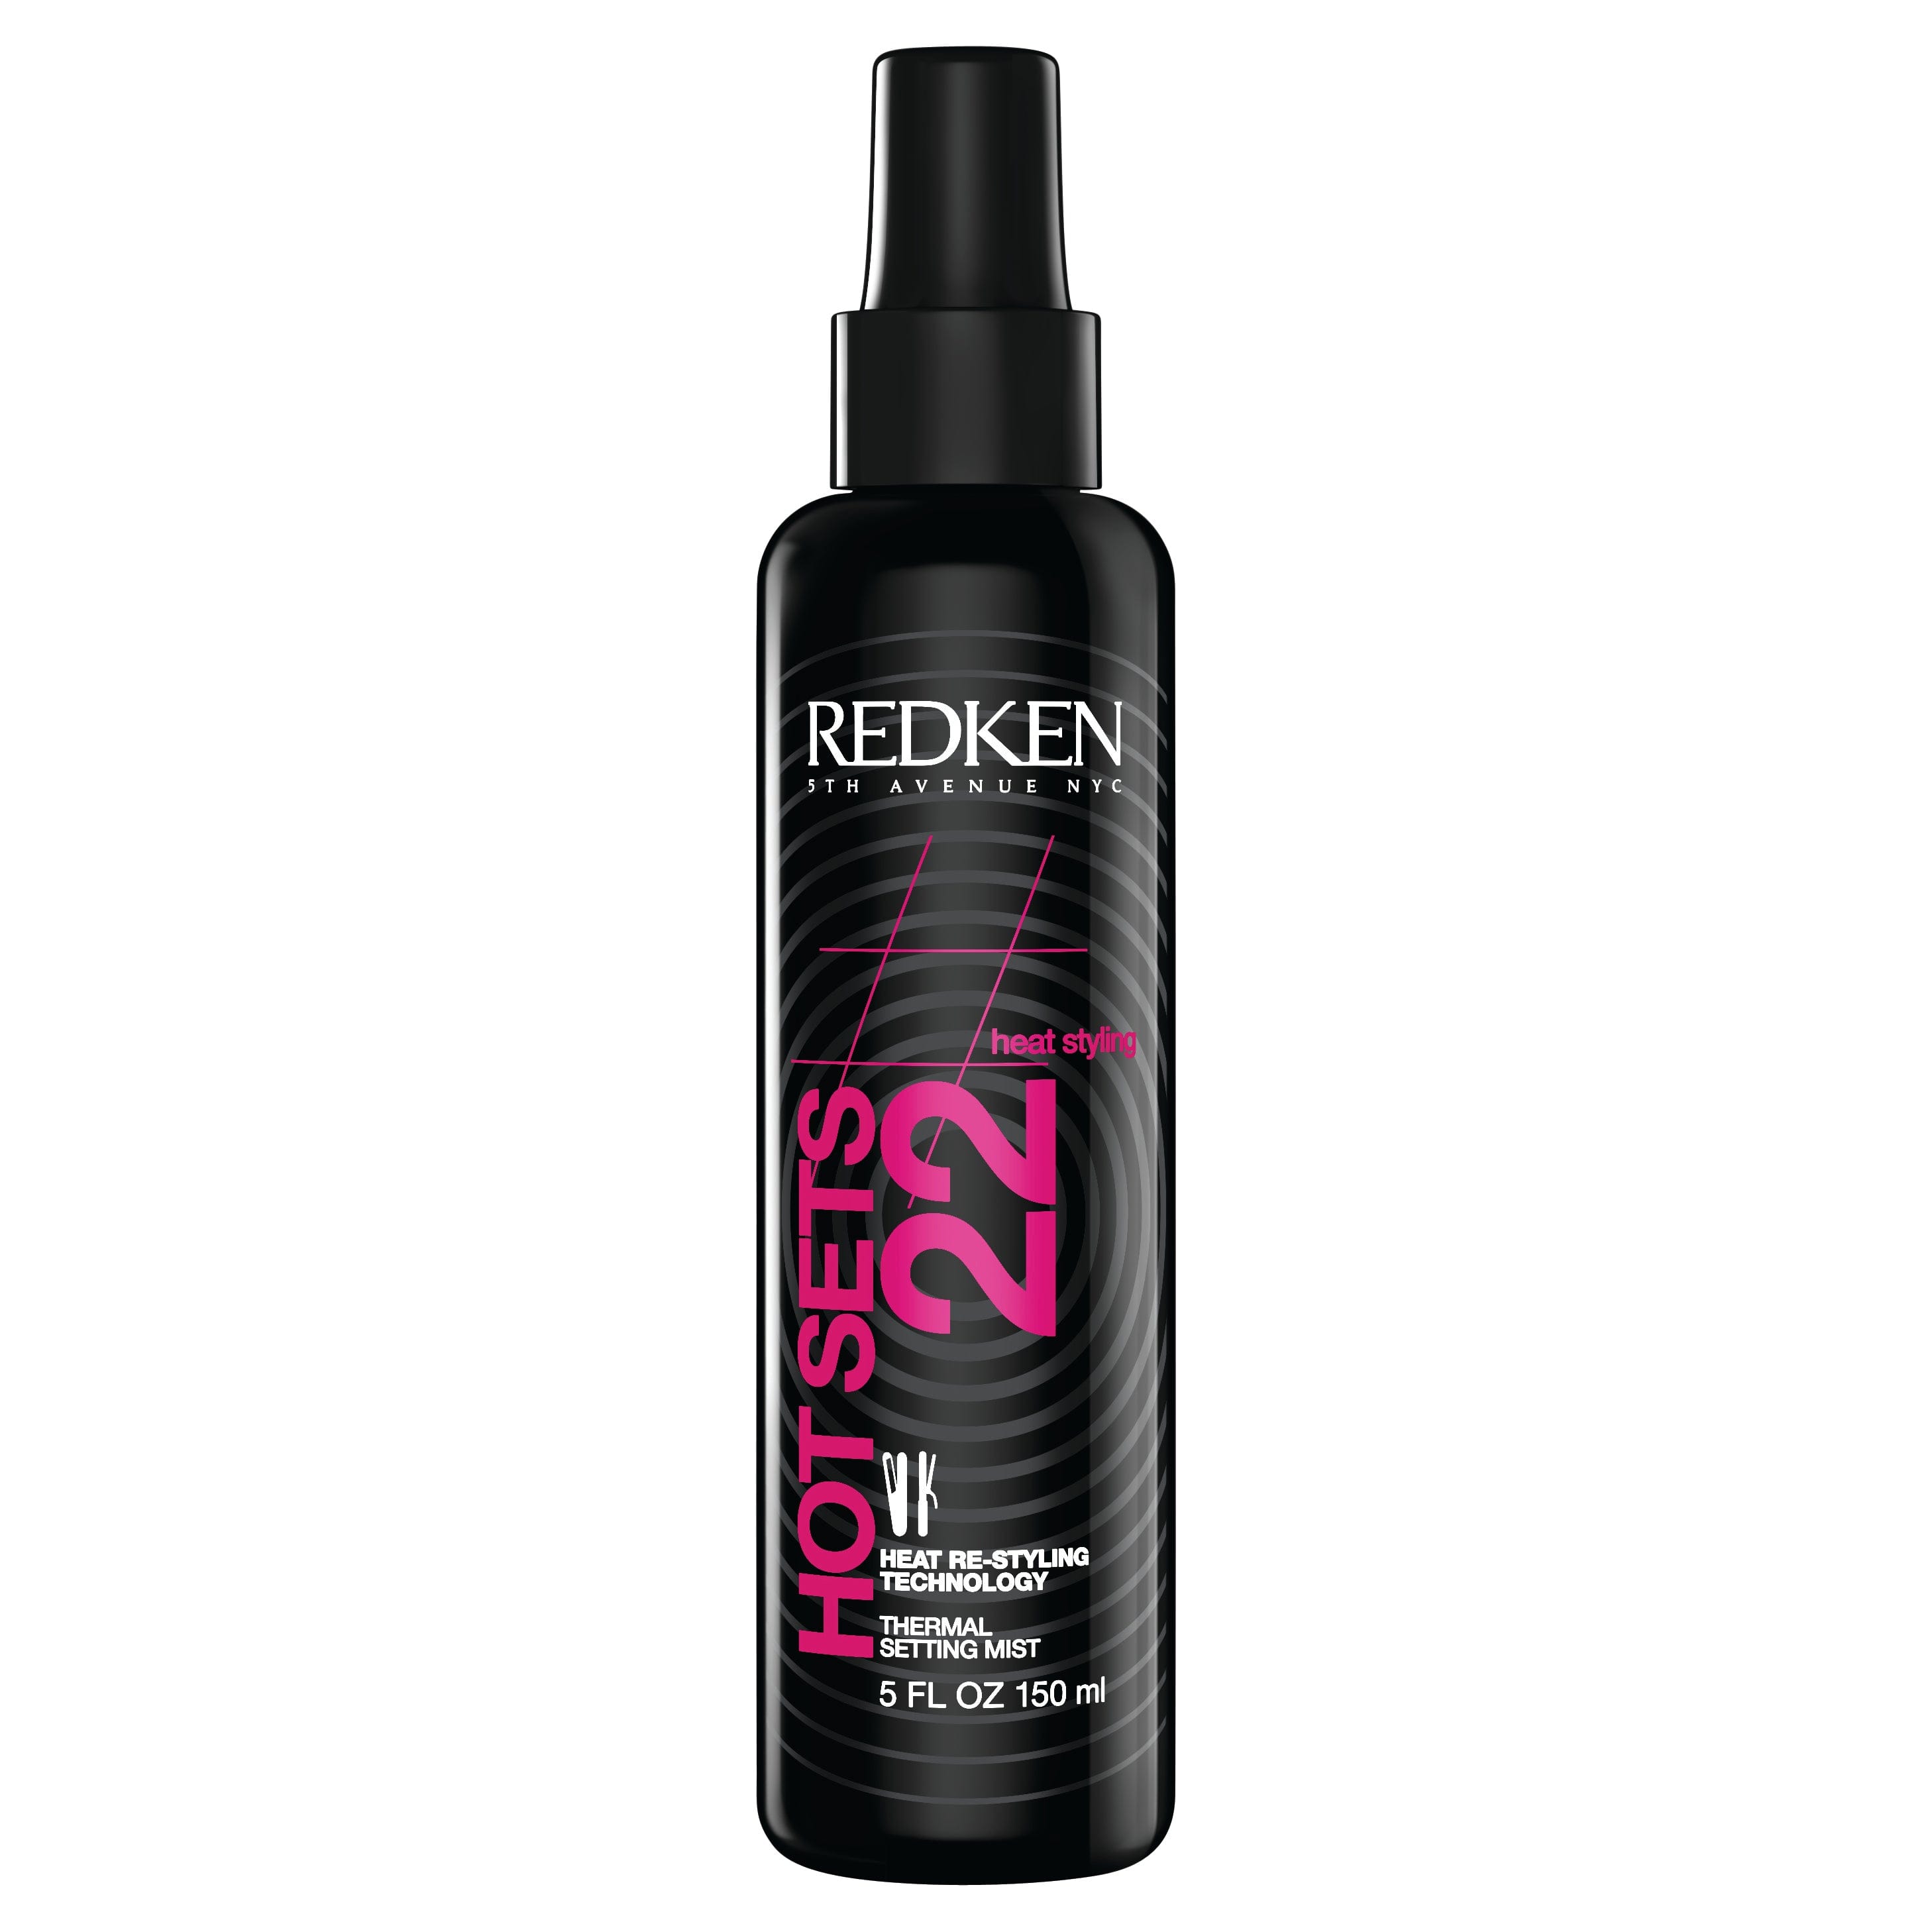 Redken® Heat Styling Hot Sets 22 Thermal Setting Mist.